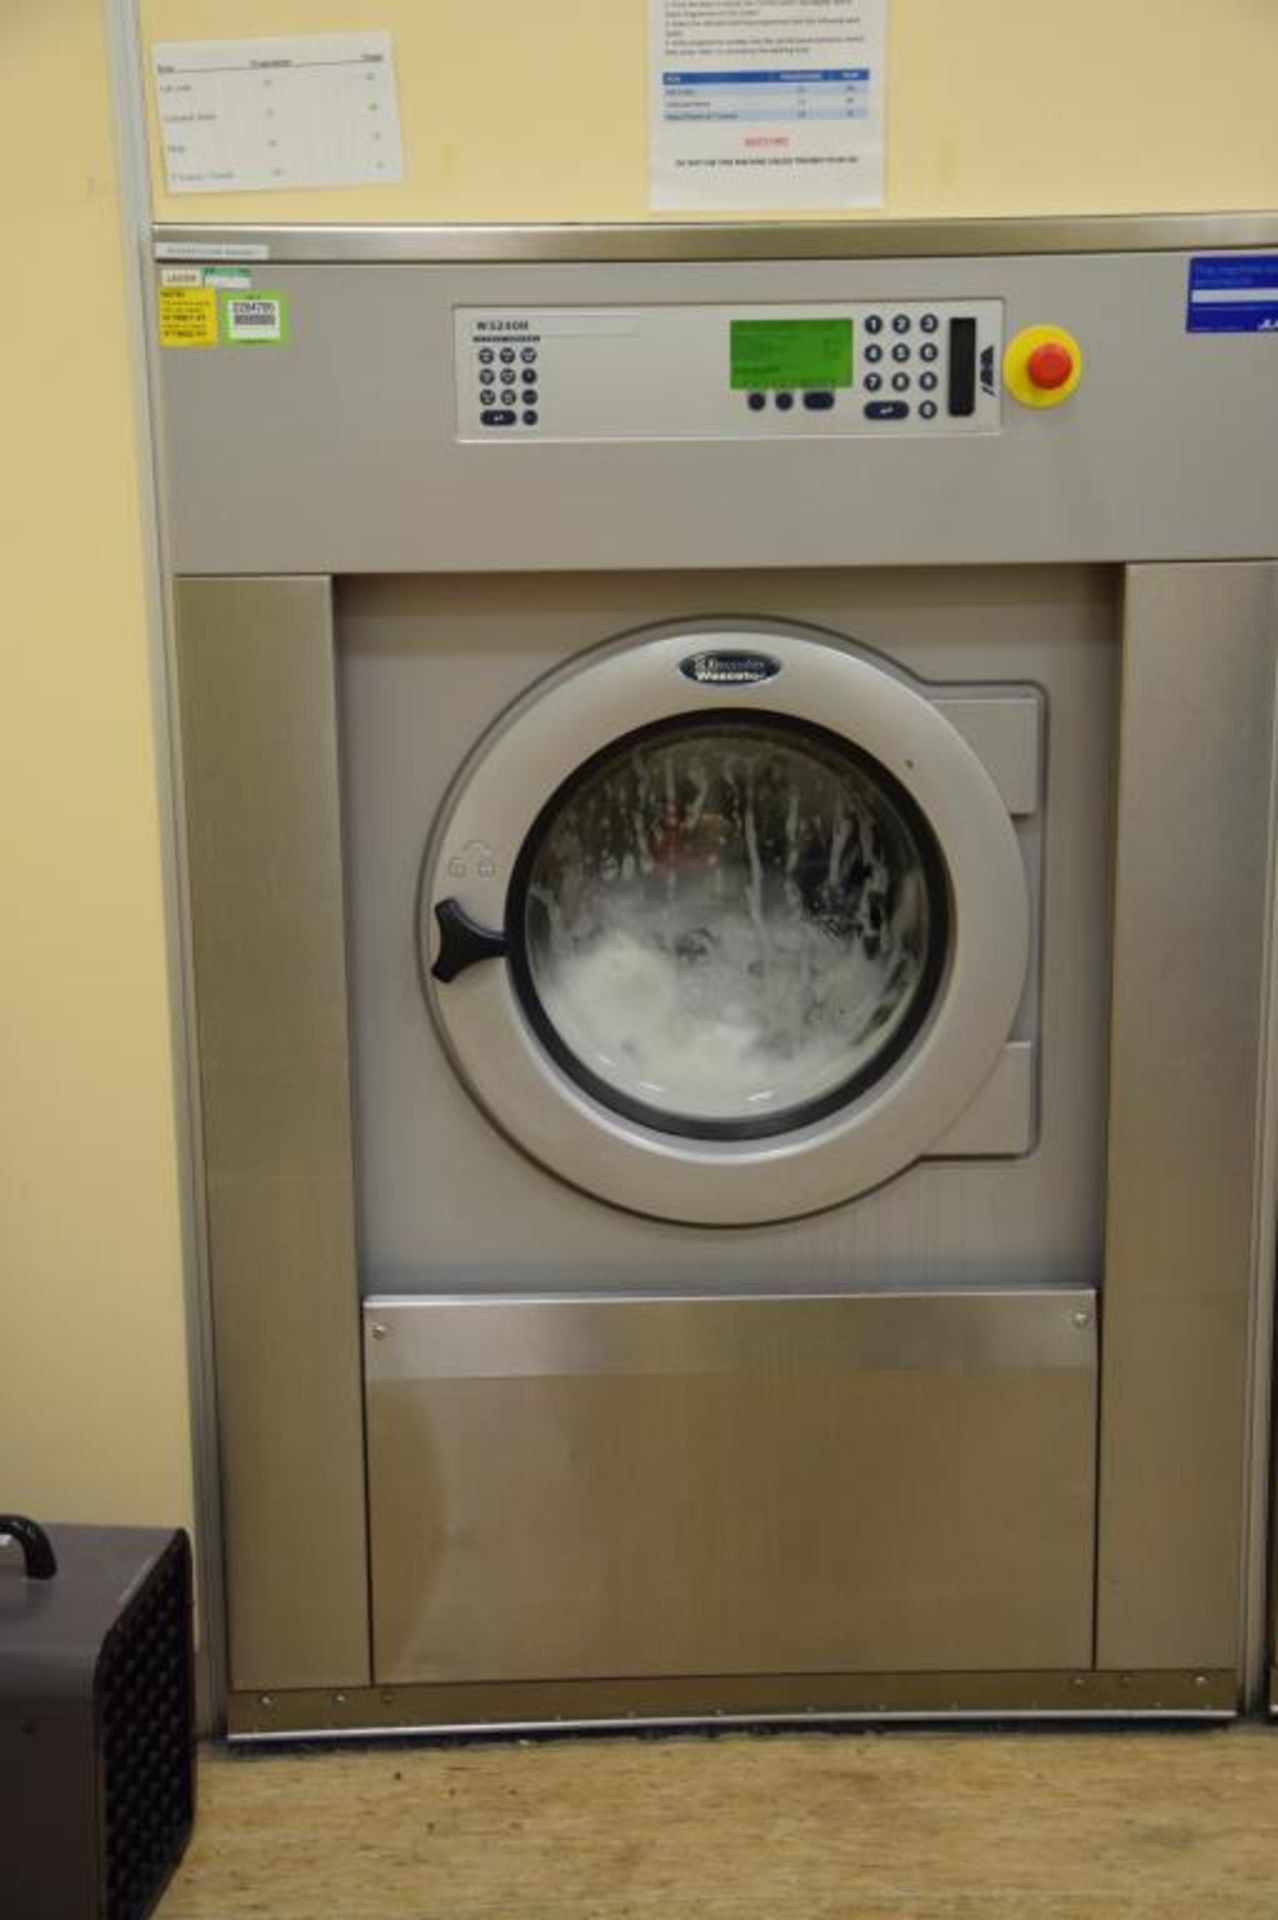 Commercial Washing Machine